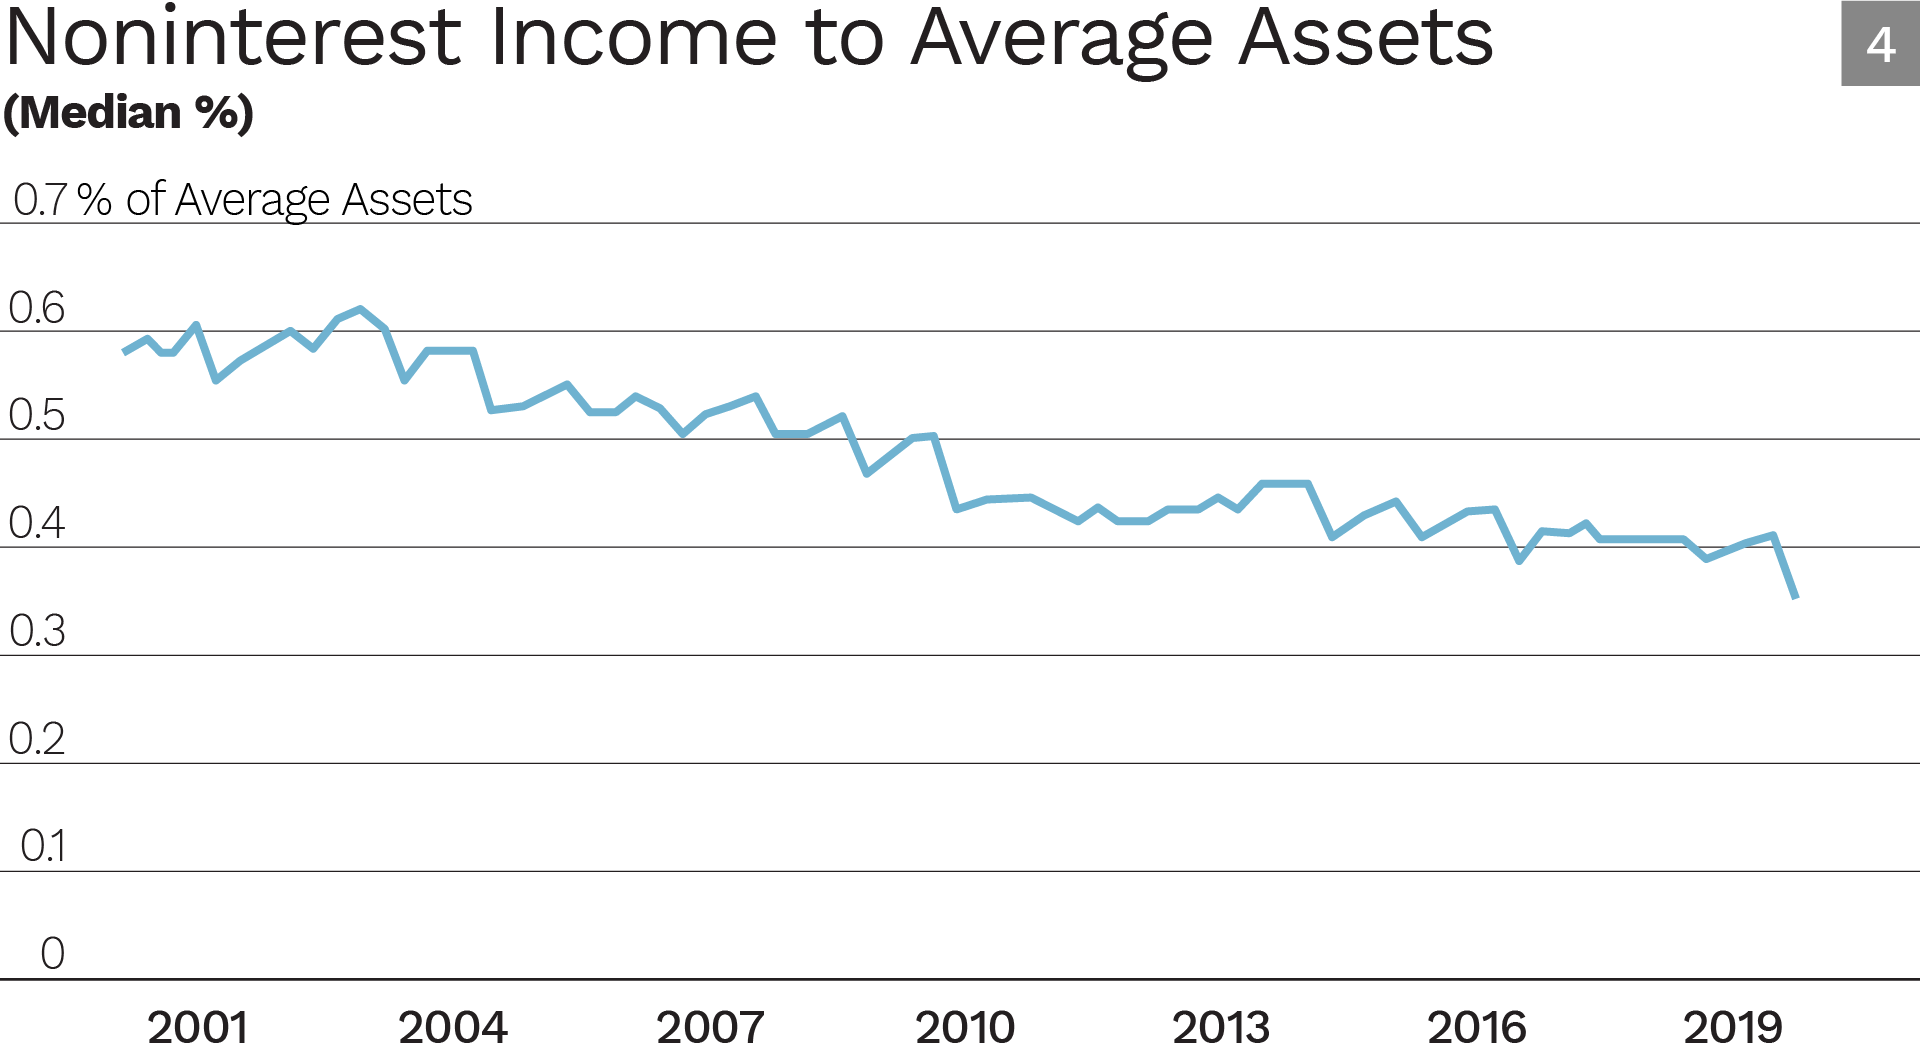 Noninterest Income to Average Assets